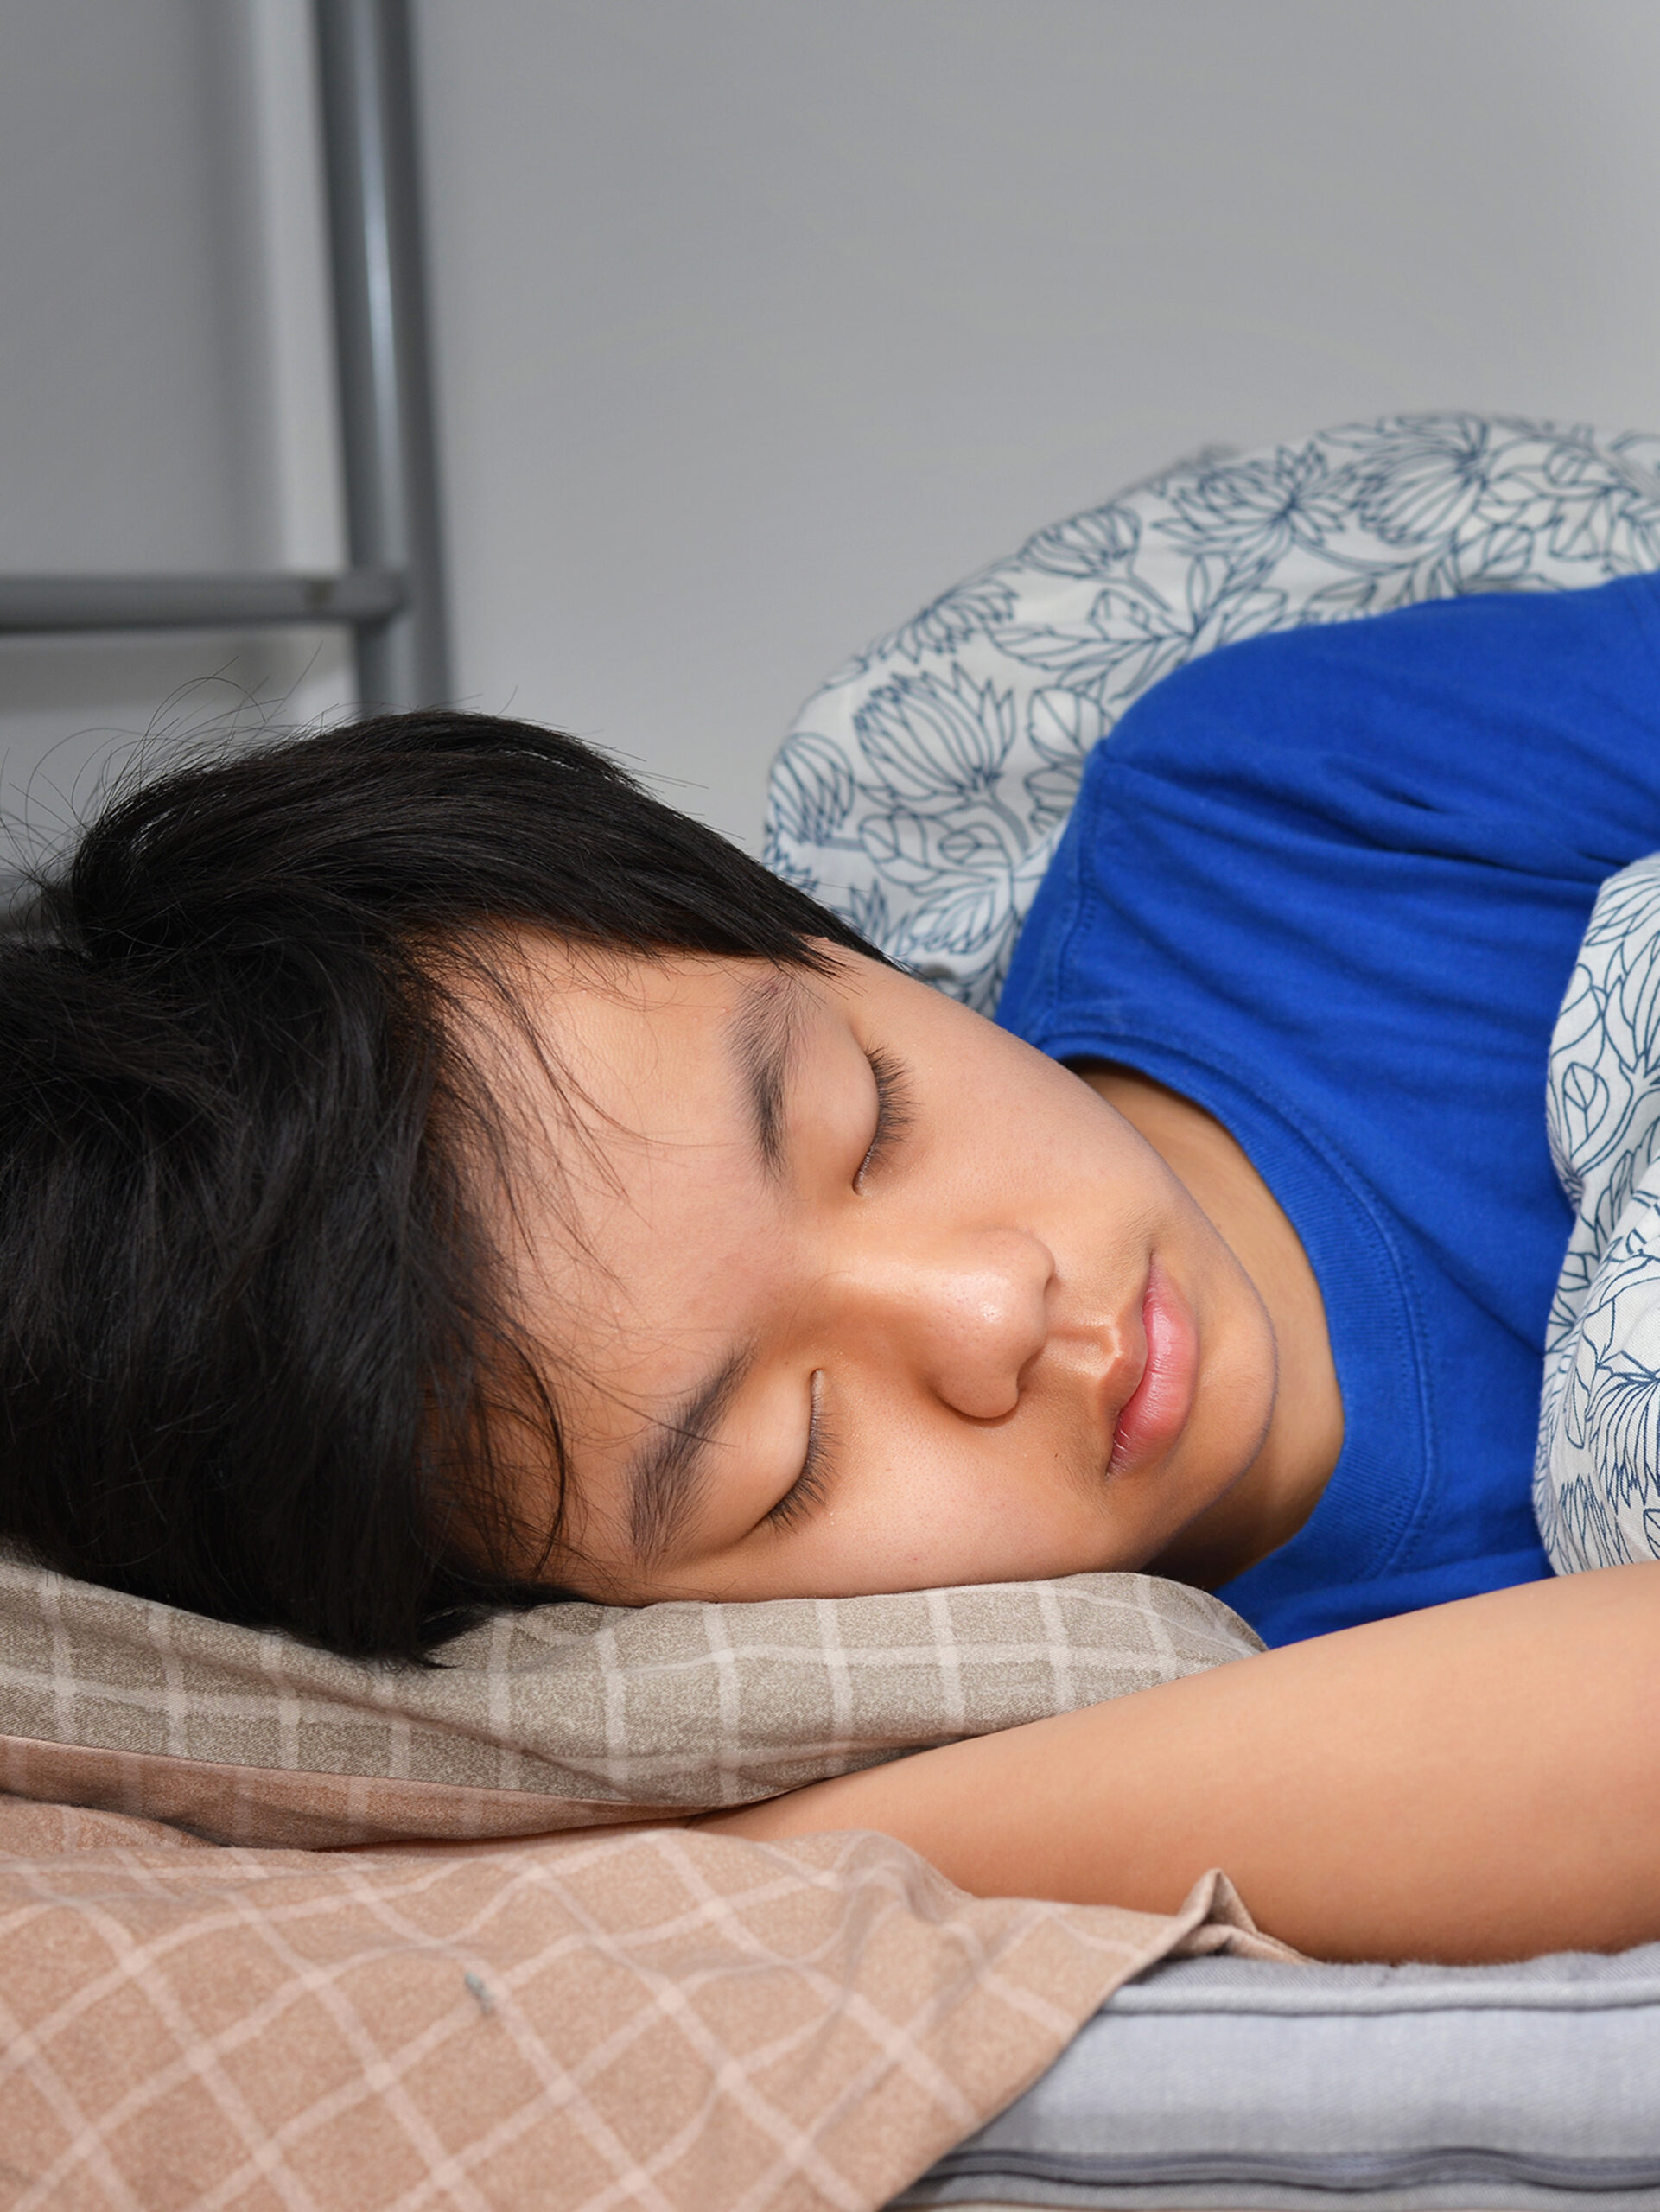 Teen sleeping - tips for adjusting your child's sleep schedule before school starts from CHOC